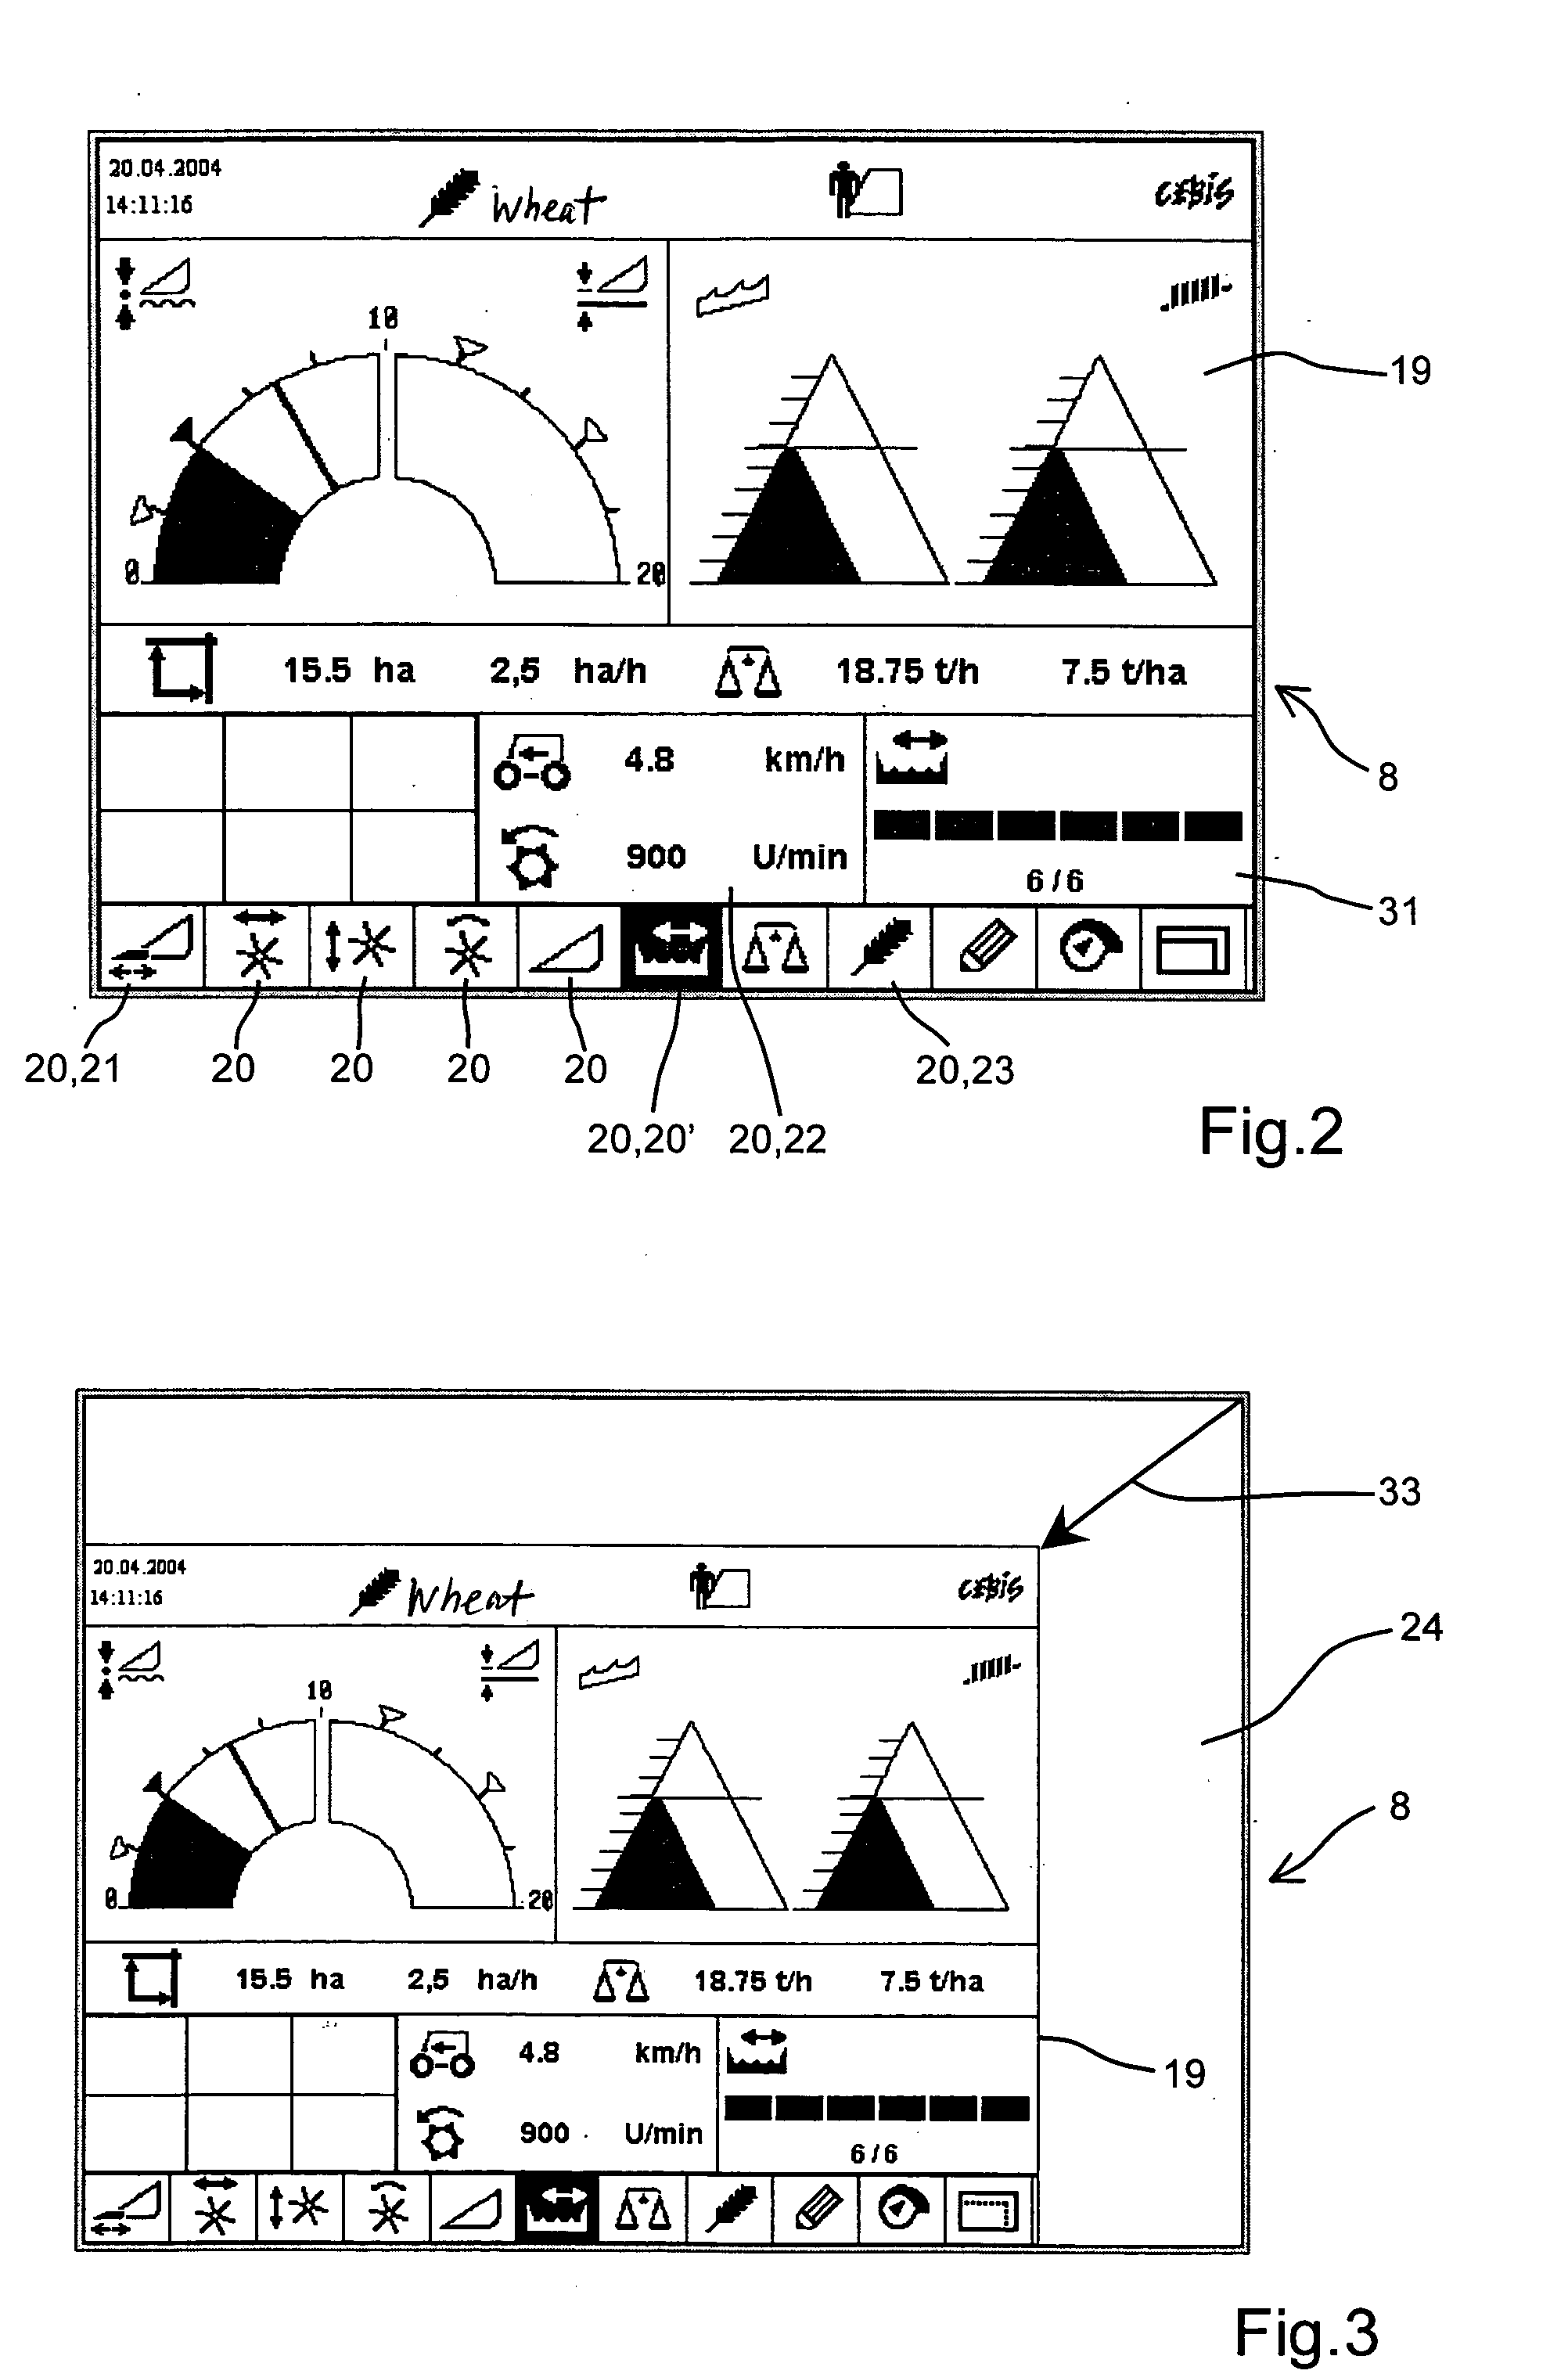 Scalable functionality windows in a display unit